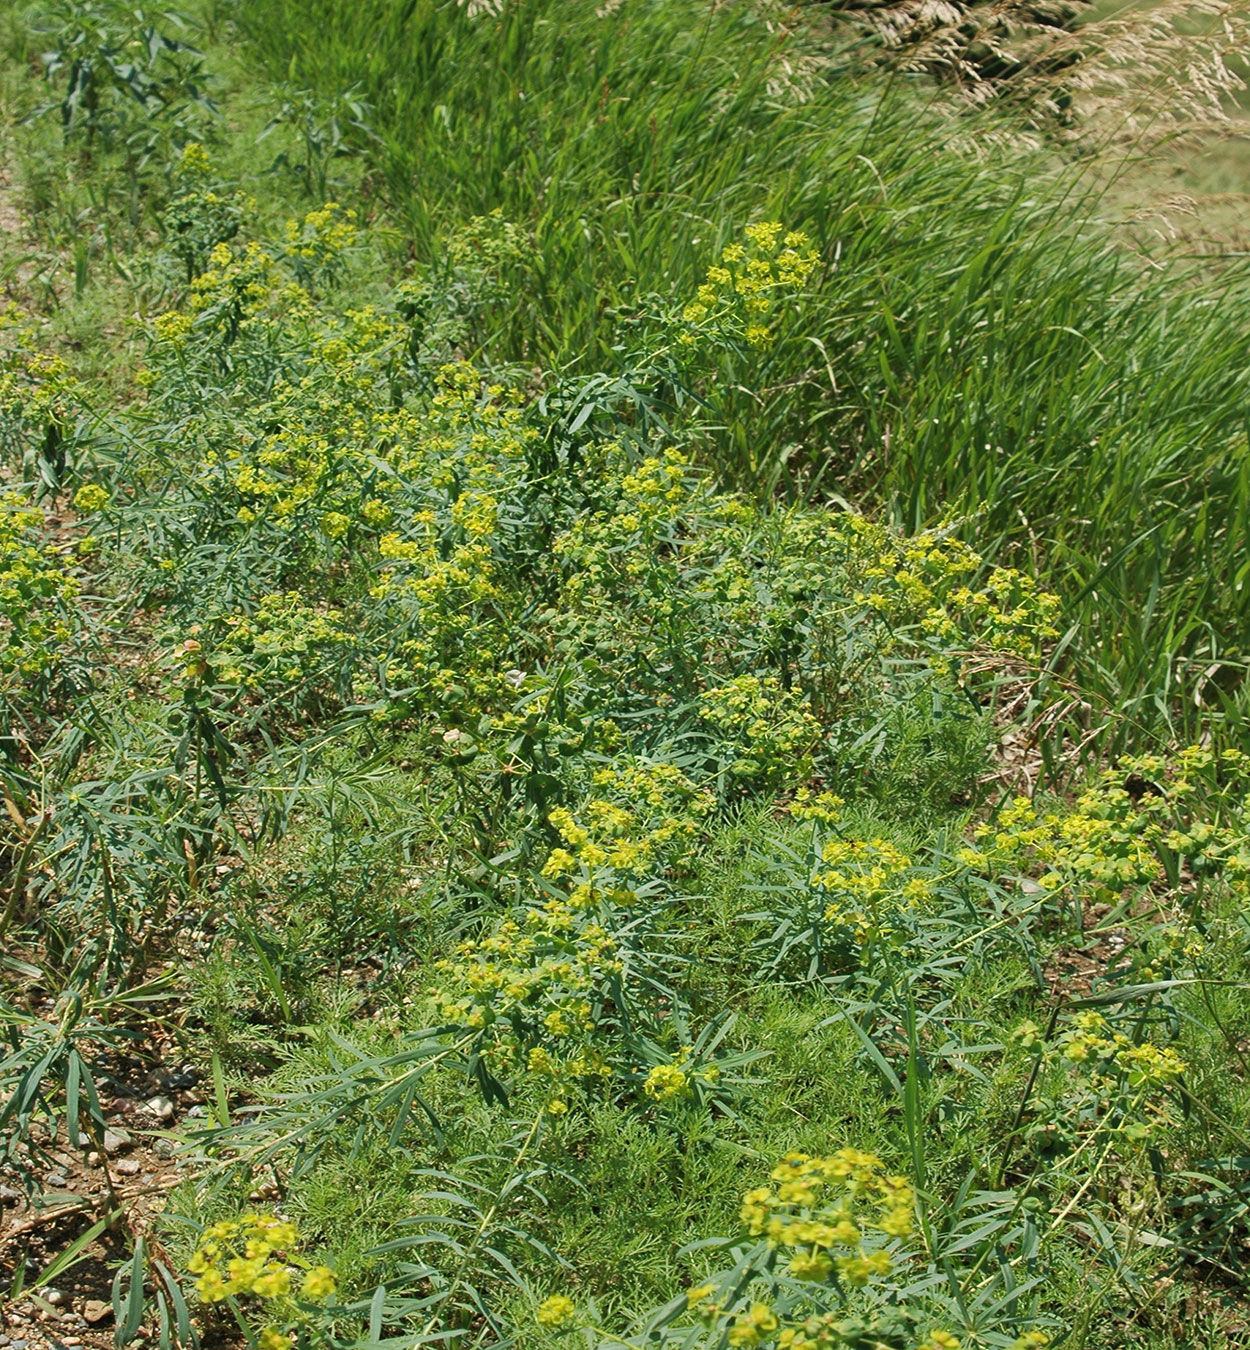 Leafy spurge growing along the edge of a field.